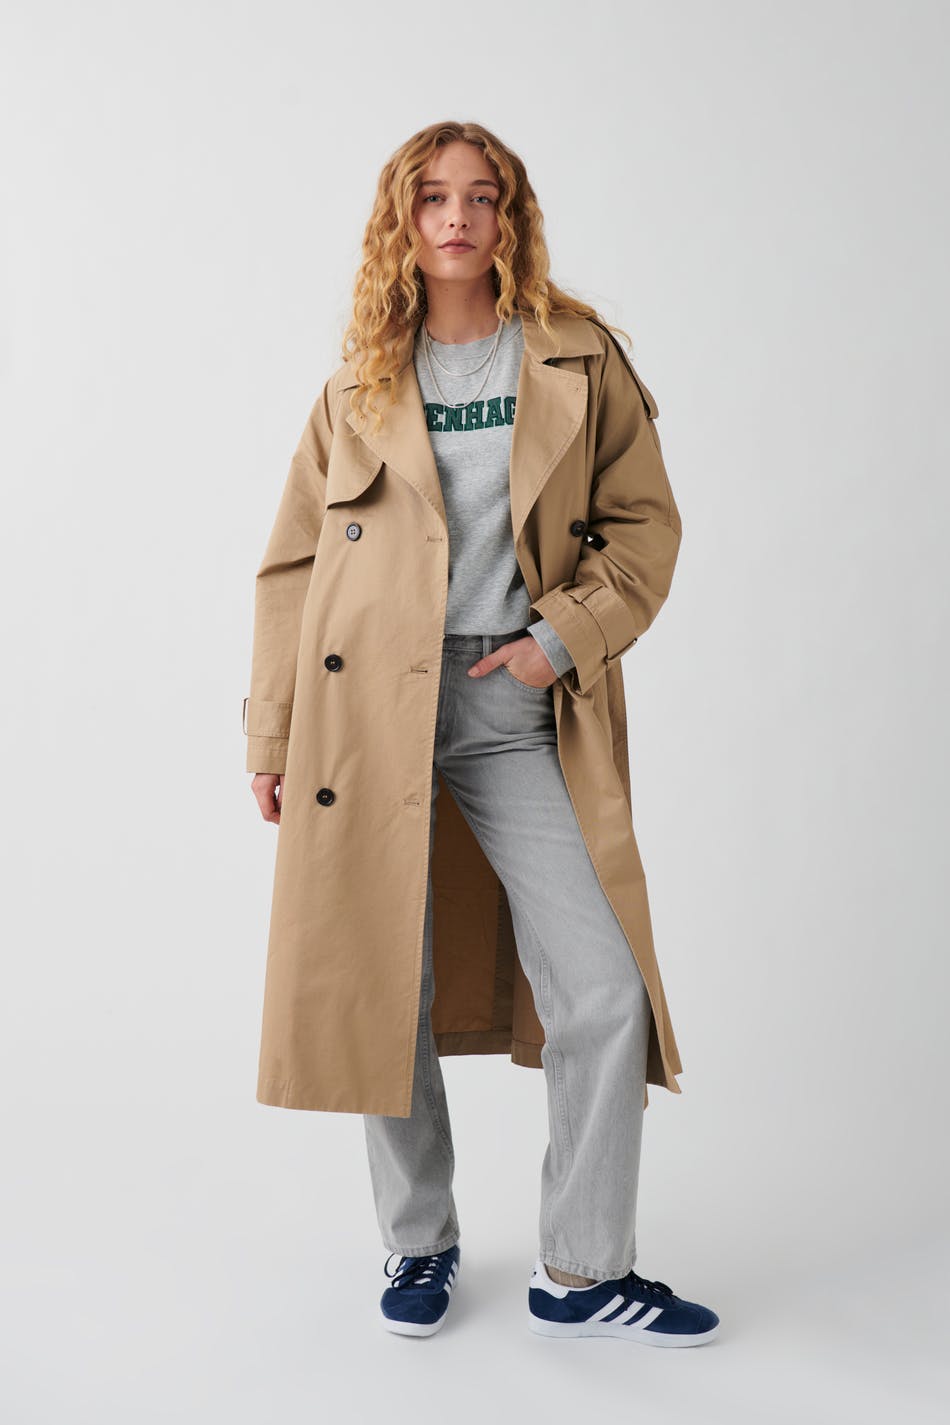 Gina Tricot - Maxi trench coat - trenchcoats - Beige - L - Female